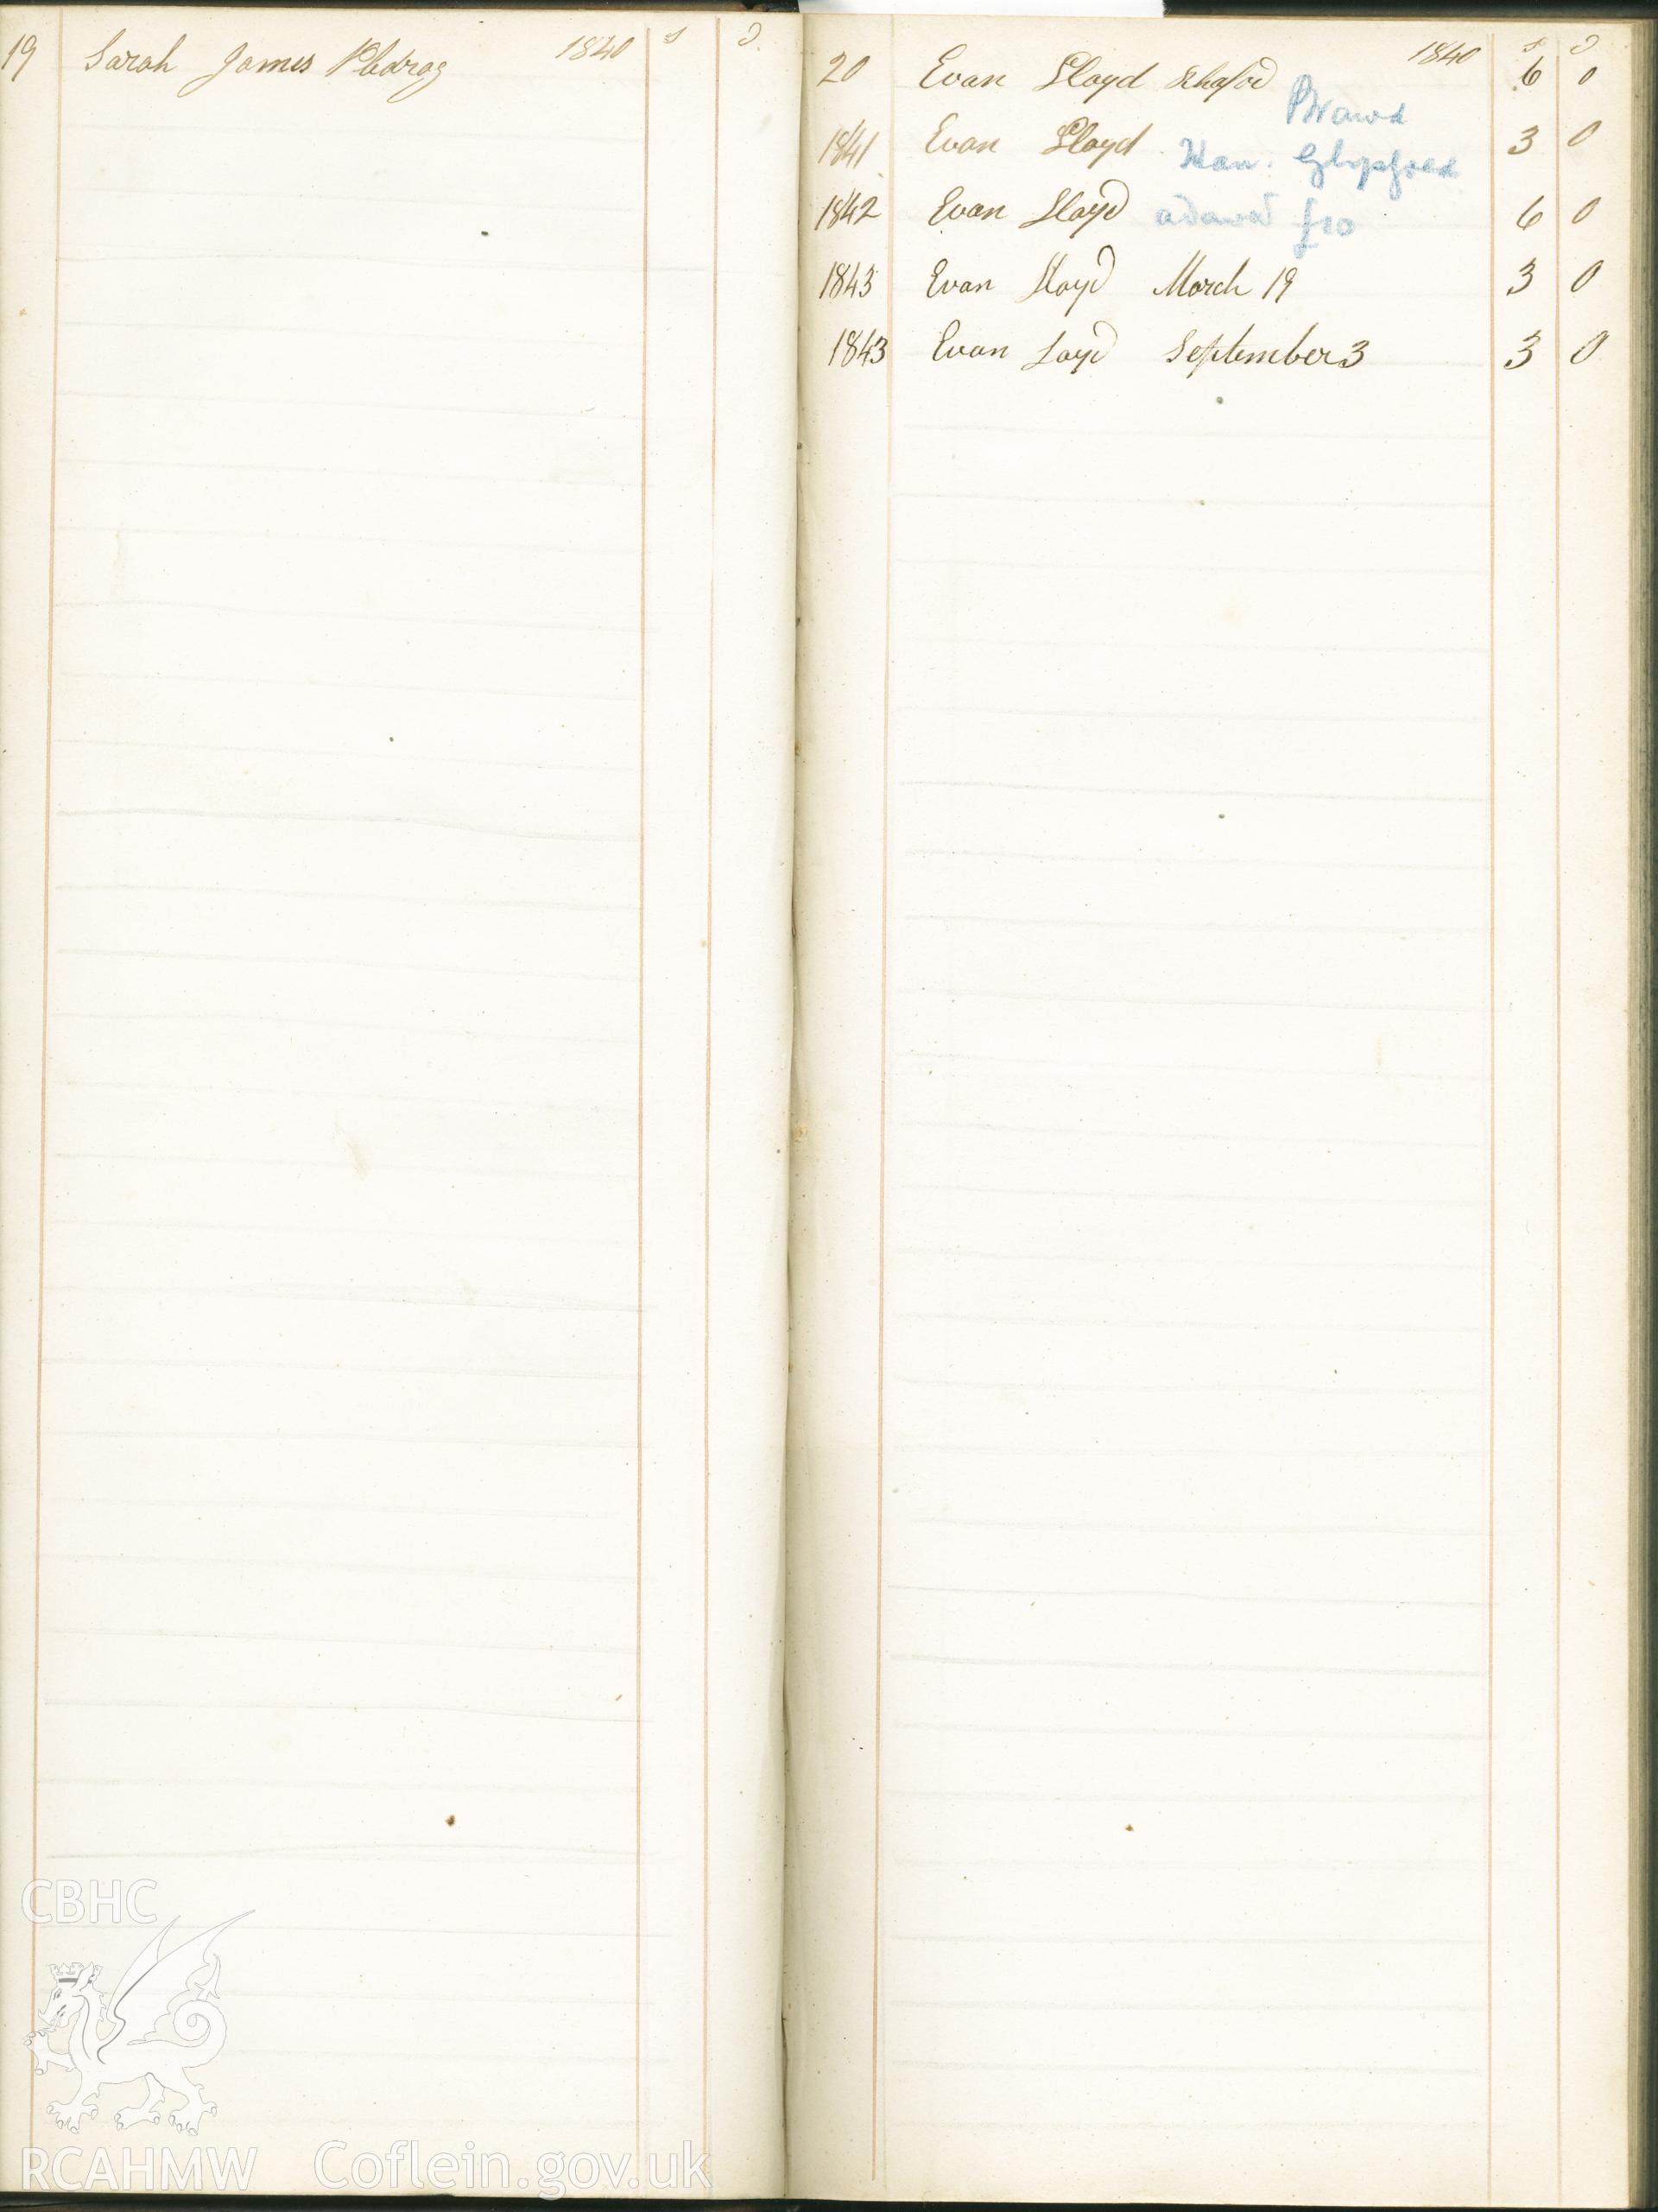 Handwritten subscribers book at Hen Gapel, Rhydowen. Page 19+20: money contributed in shillings (s) and pence (d). From 1840 Sarah James Pildrag (?) (6s) to 3 September 1843 Evan Loyd (3s). Donated to RCAHMW as part of the Digital Dissent Project.